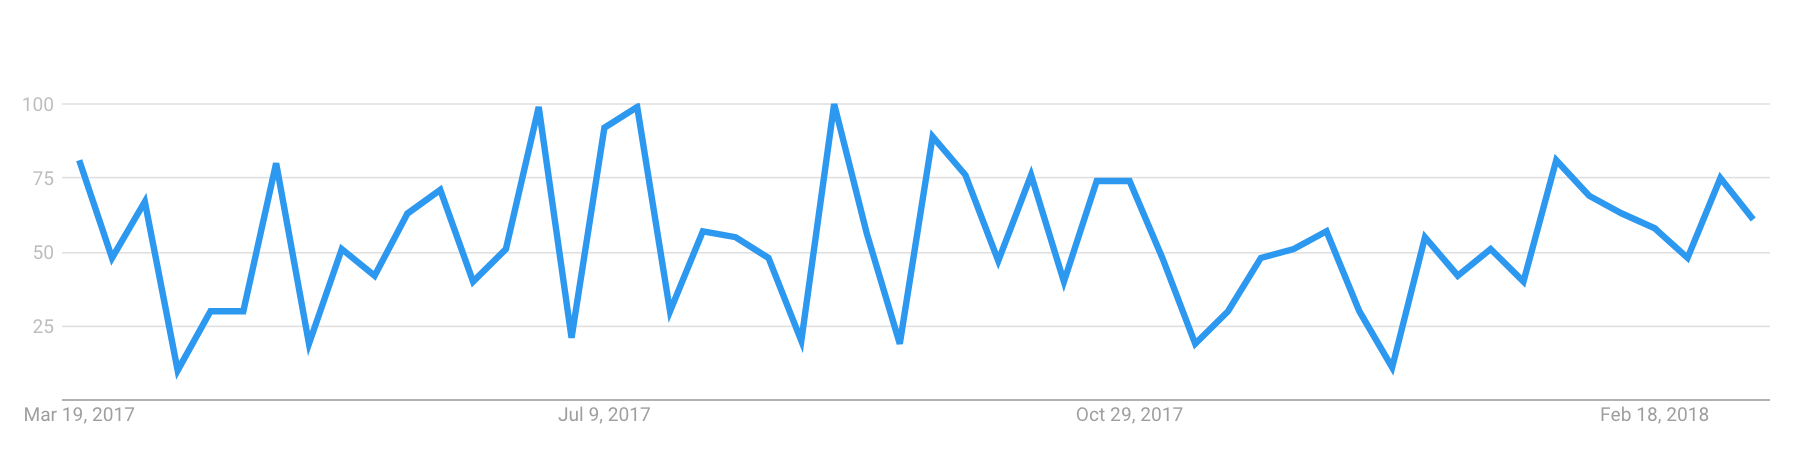 Worldwide Google Search Volume Related to Ferrite Products